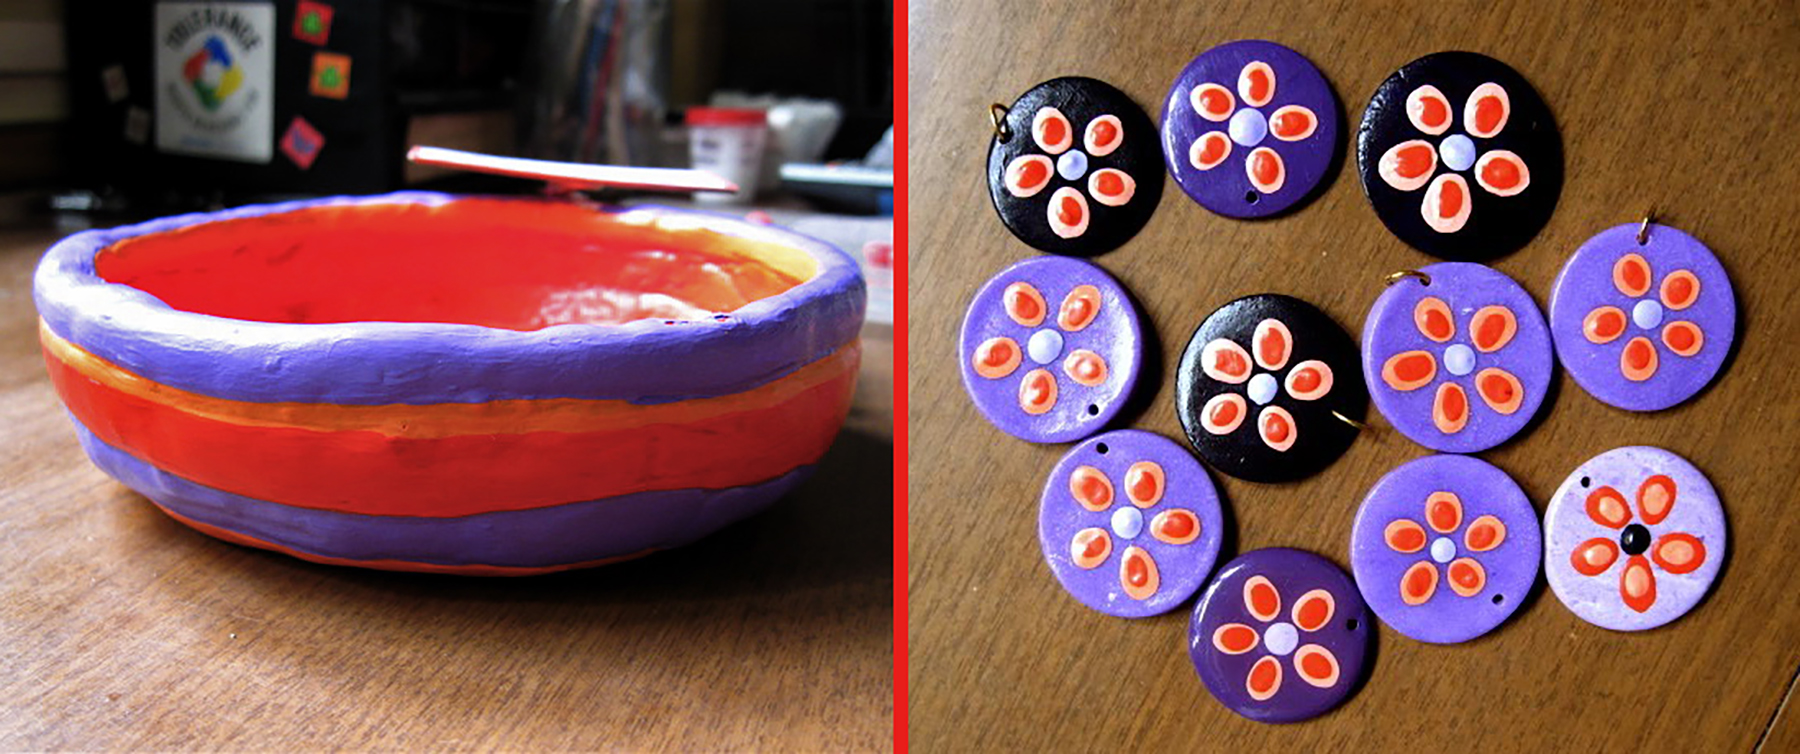 Side-by-side photos of a painted clay bowl and clay discs with painted on design.